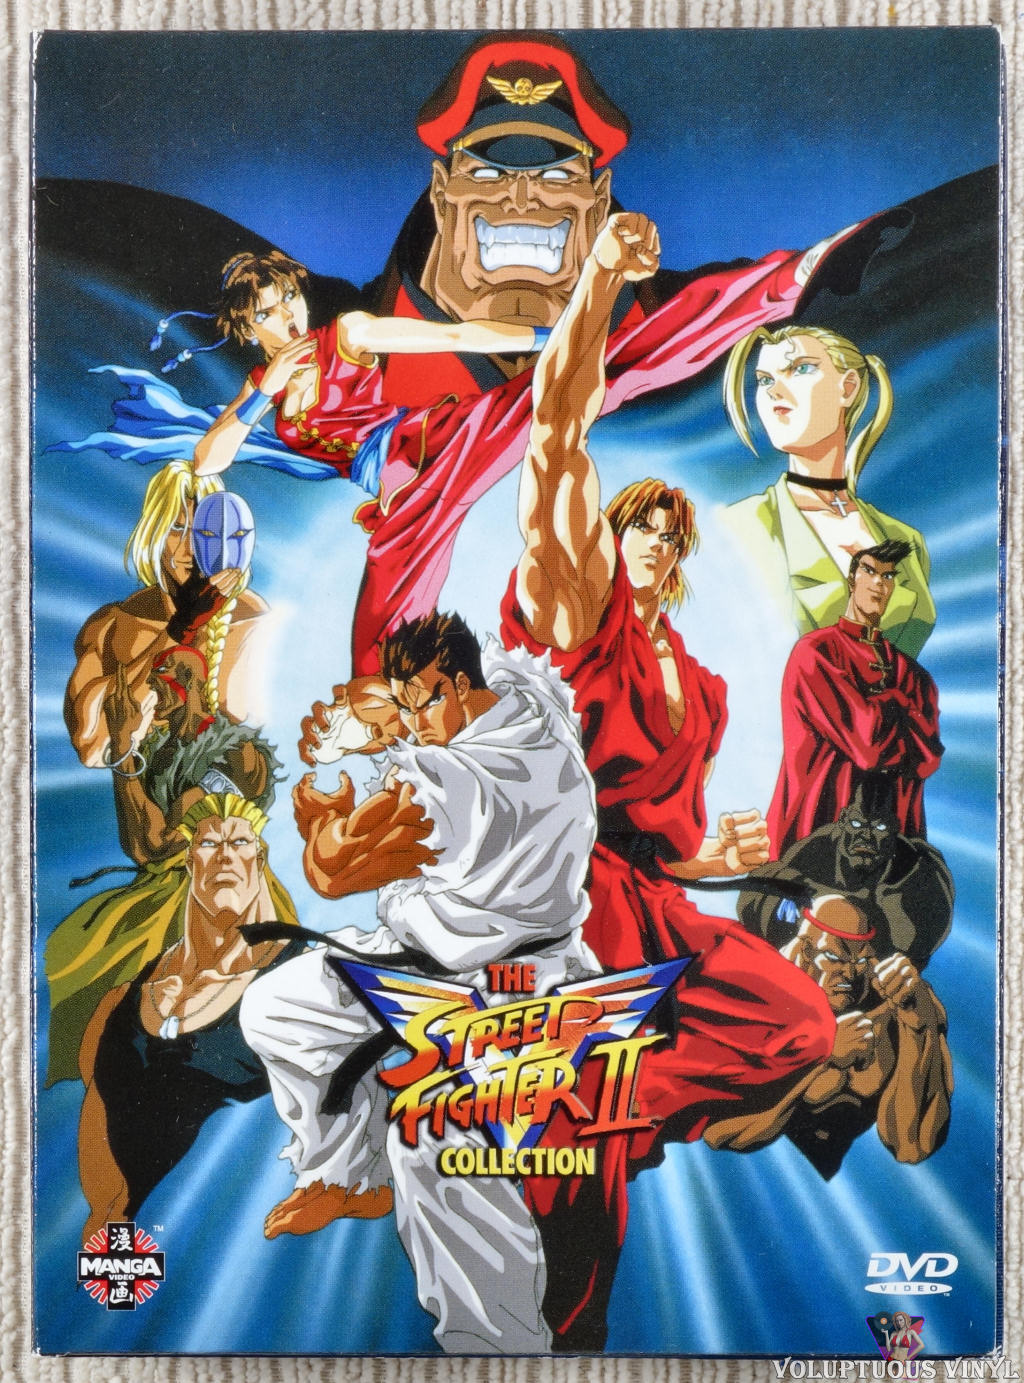 Street Fighter II V - The Collection (DVD, 2003, 4-Disc Set) for